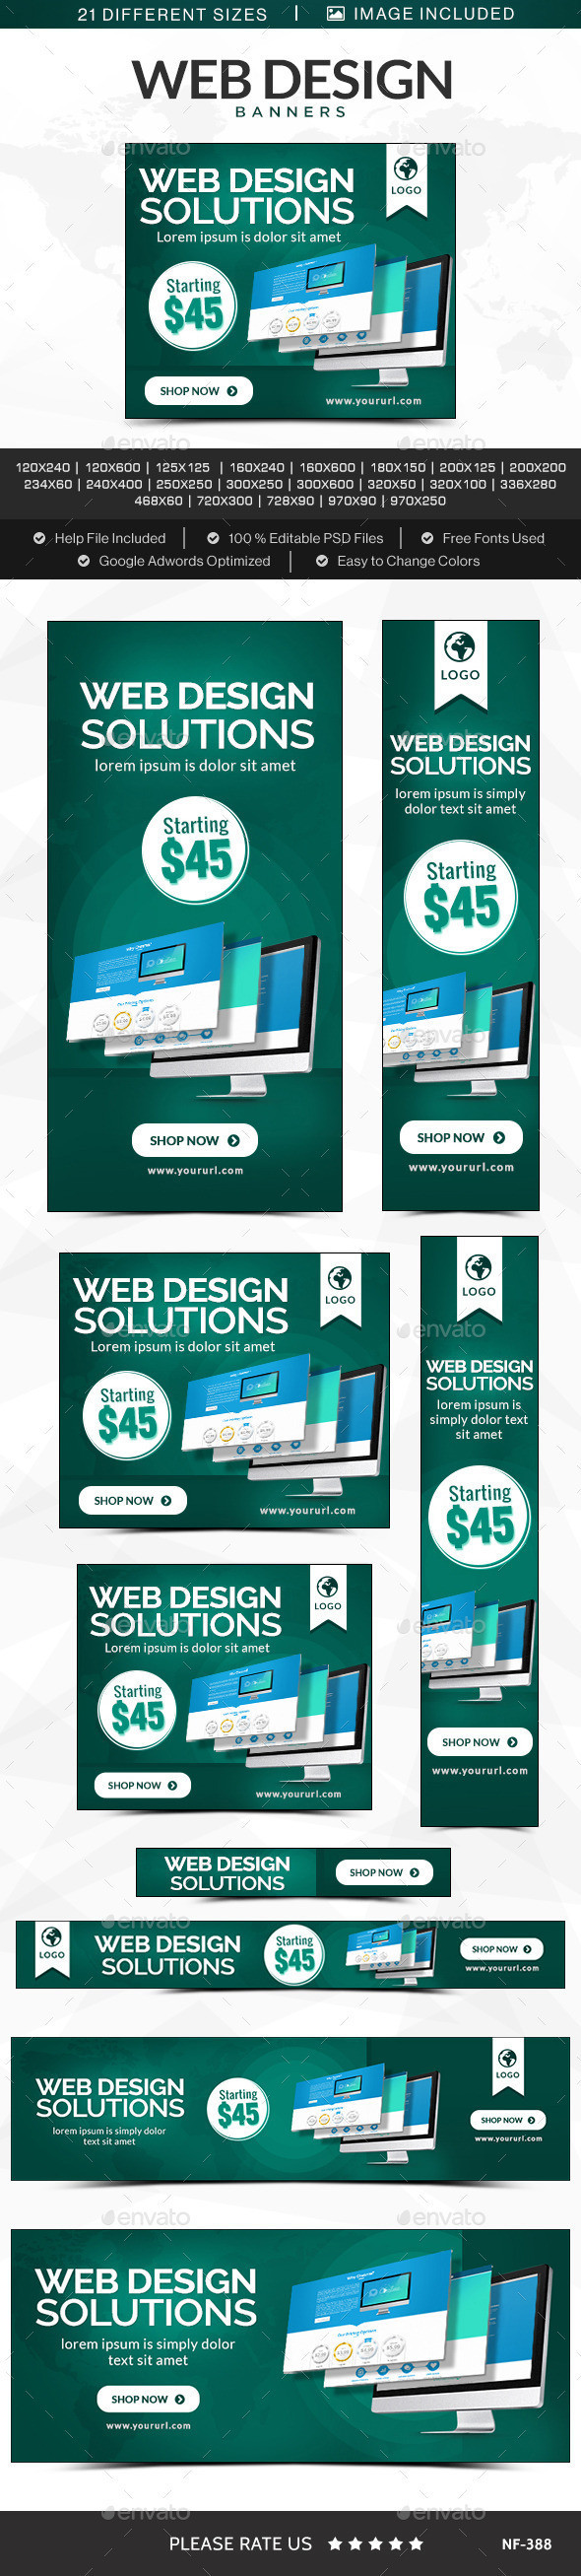 Nf 388 web 20design 20banners preview